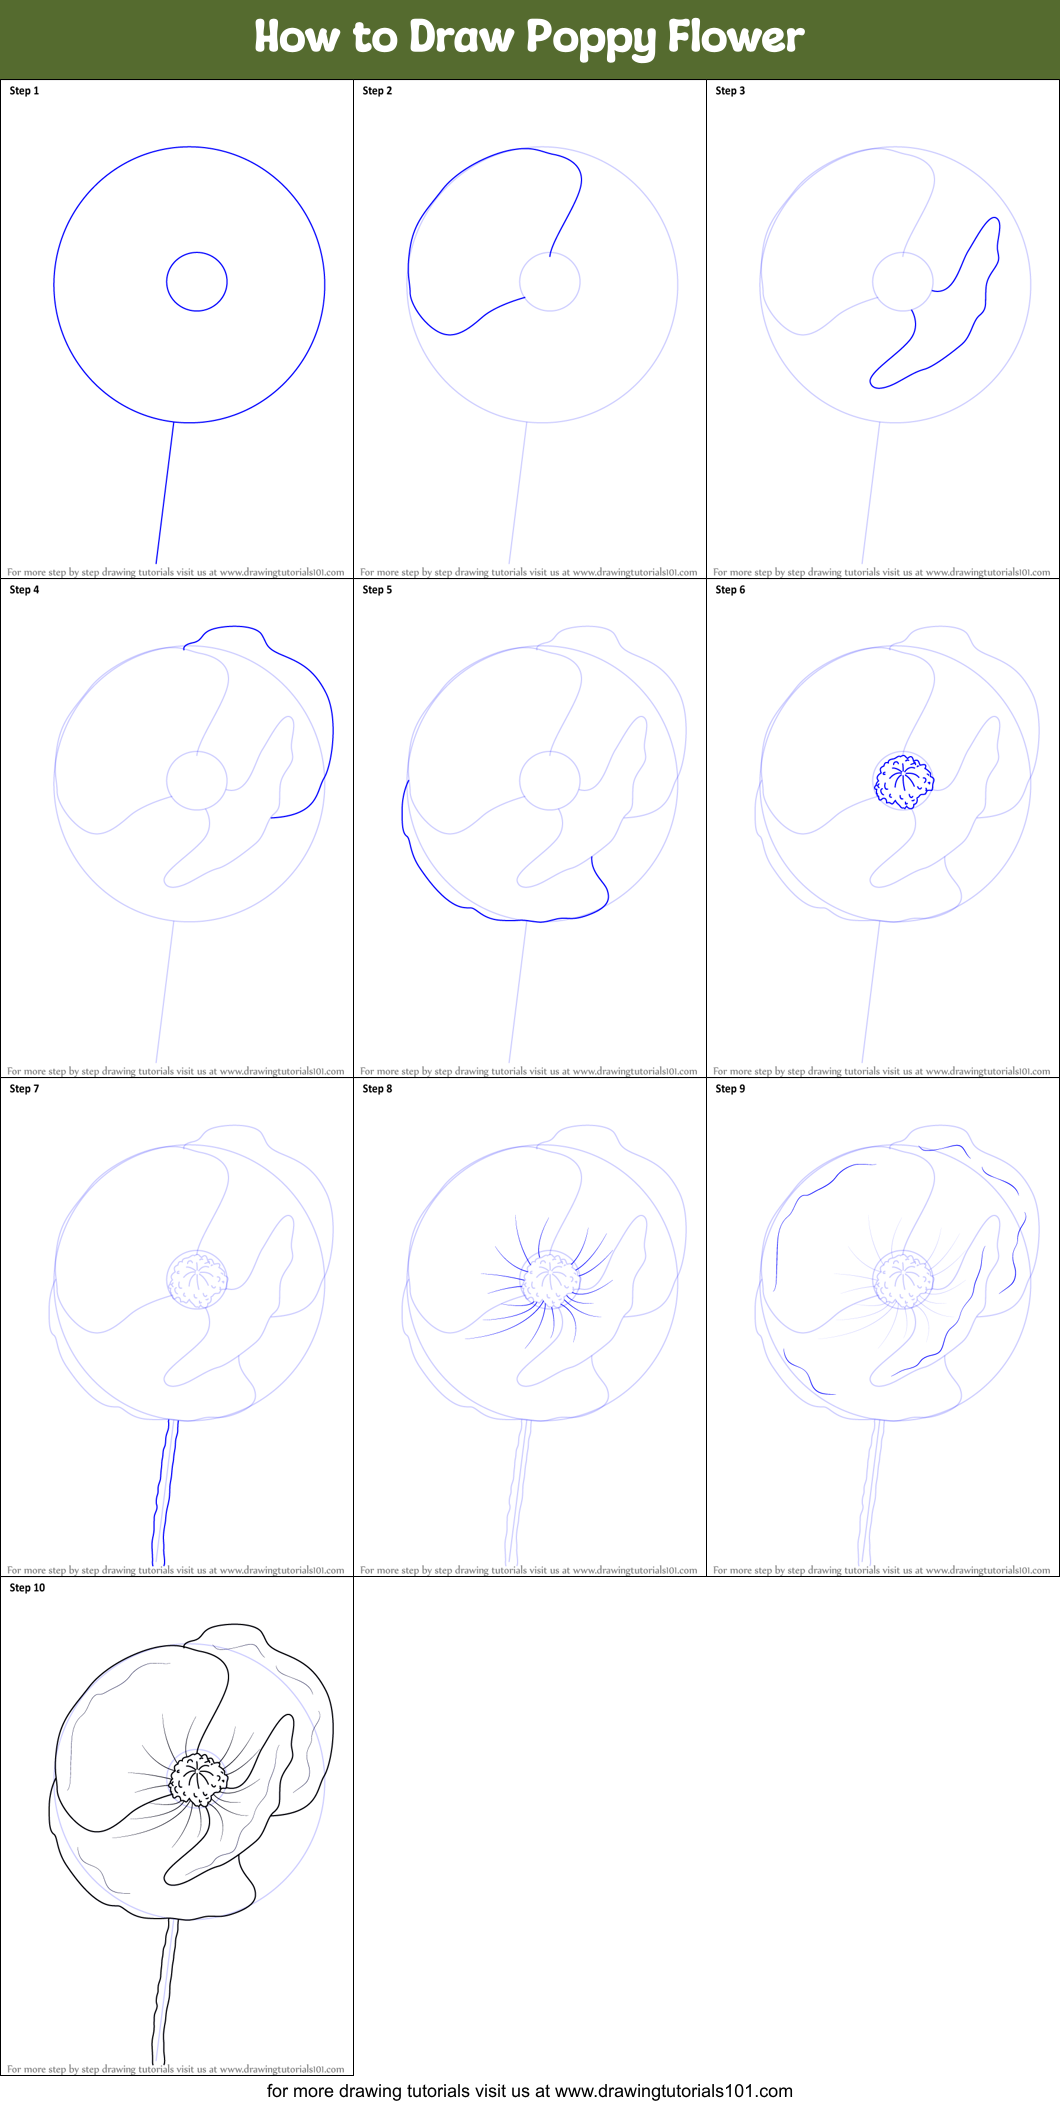 How to Draw Poppy Flower printable step by step drawing sheet